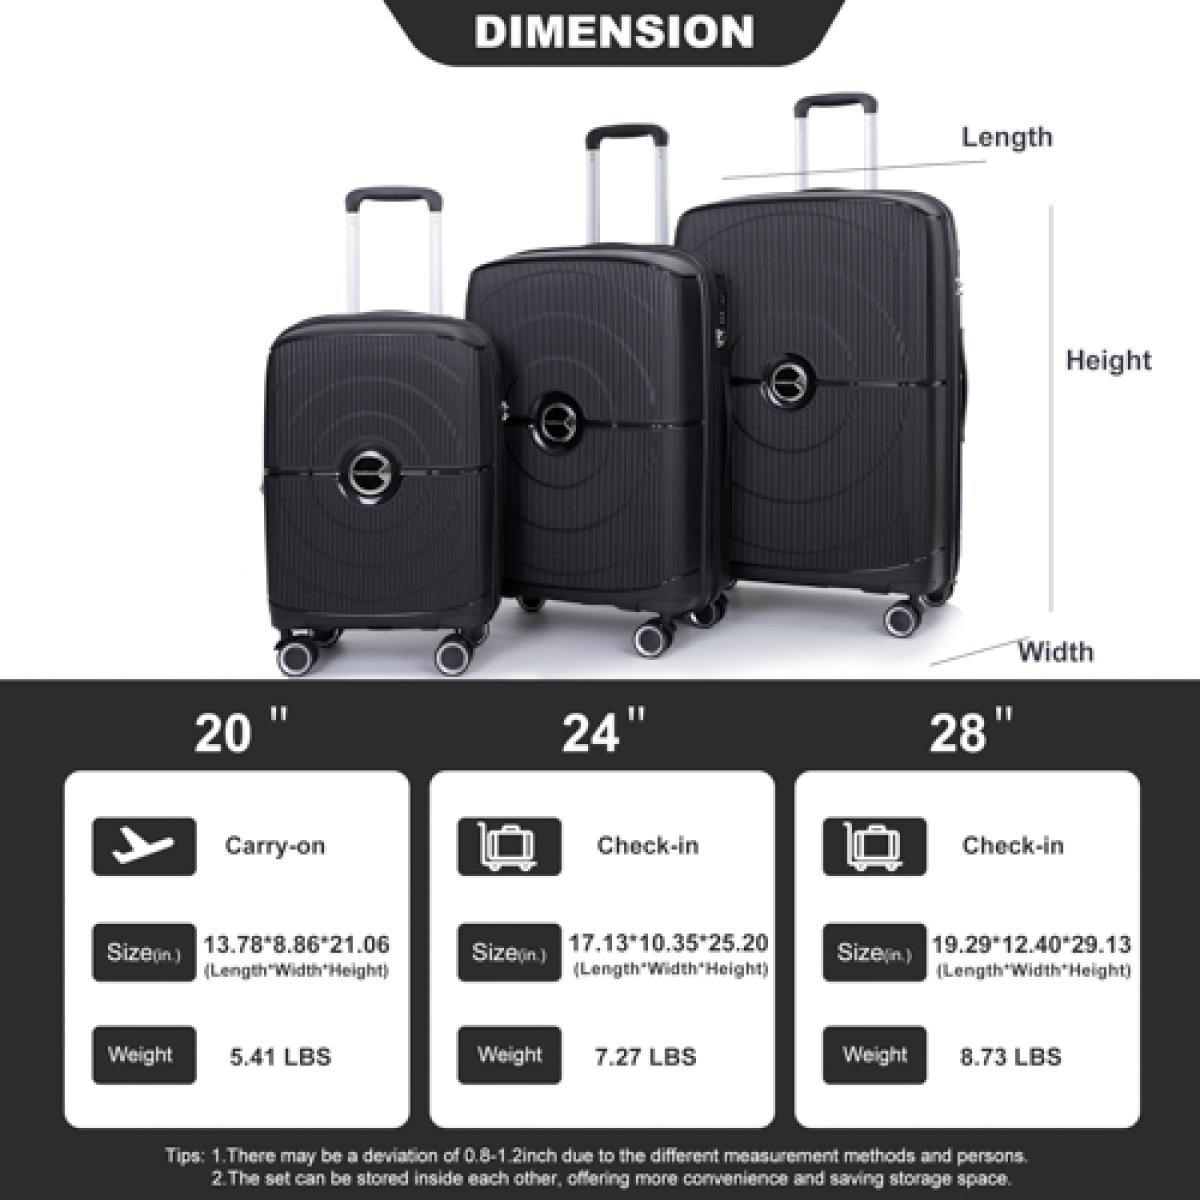 Expandable Hardshell Suitcase Double Spinner Wheels Pp Luggage Sets Lightweight Durable Suitcase with Tsa Lock,3-Piece Set (20/24/28) ,Black